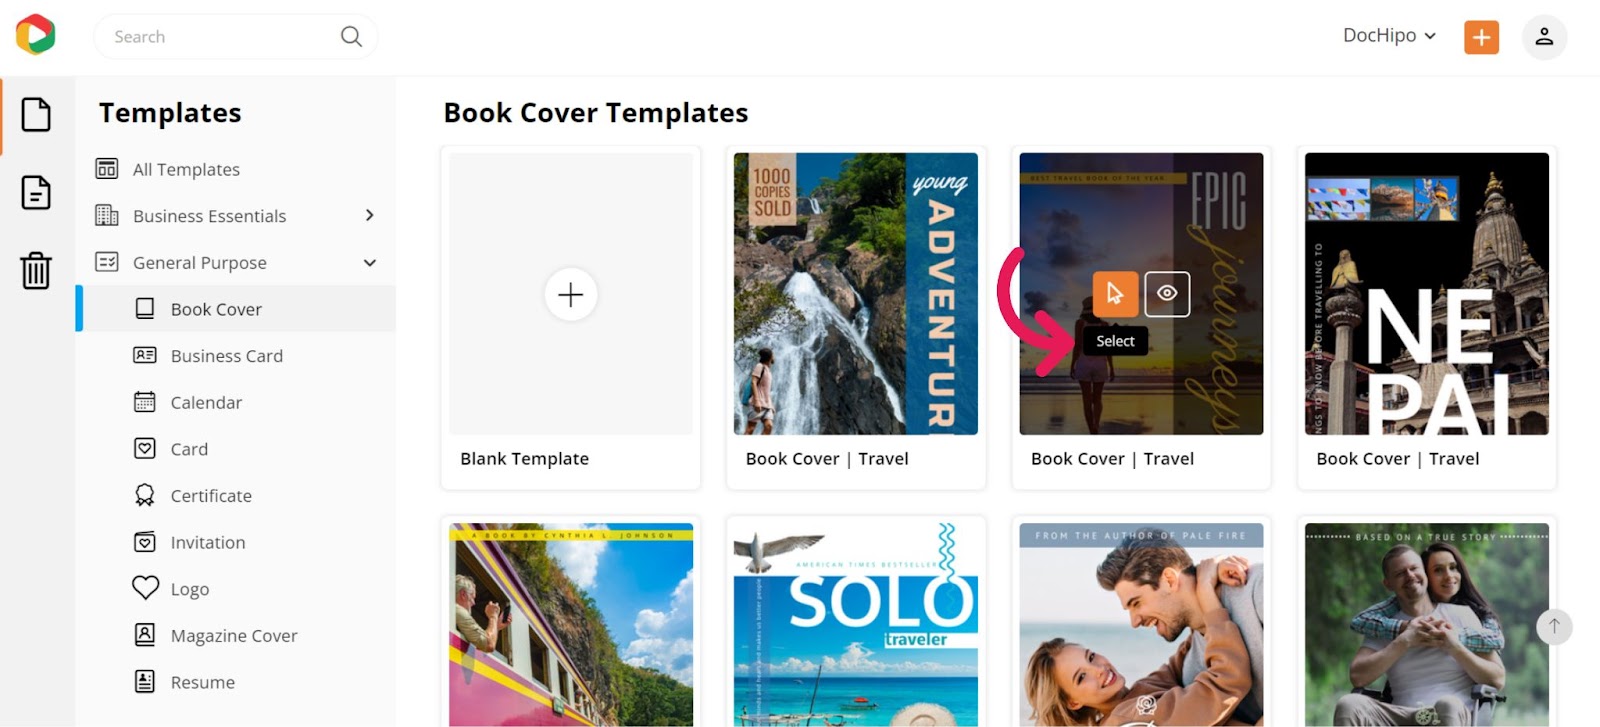 Select Book Cover Templates